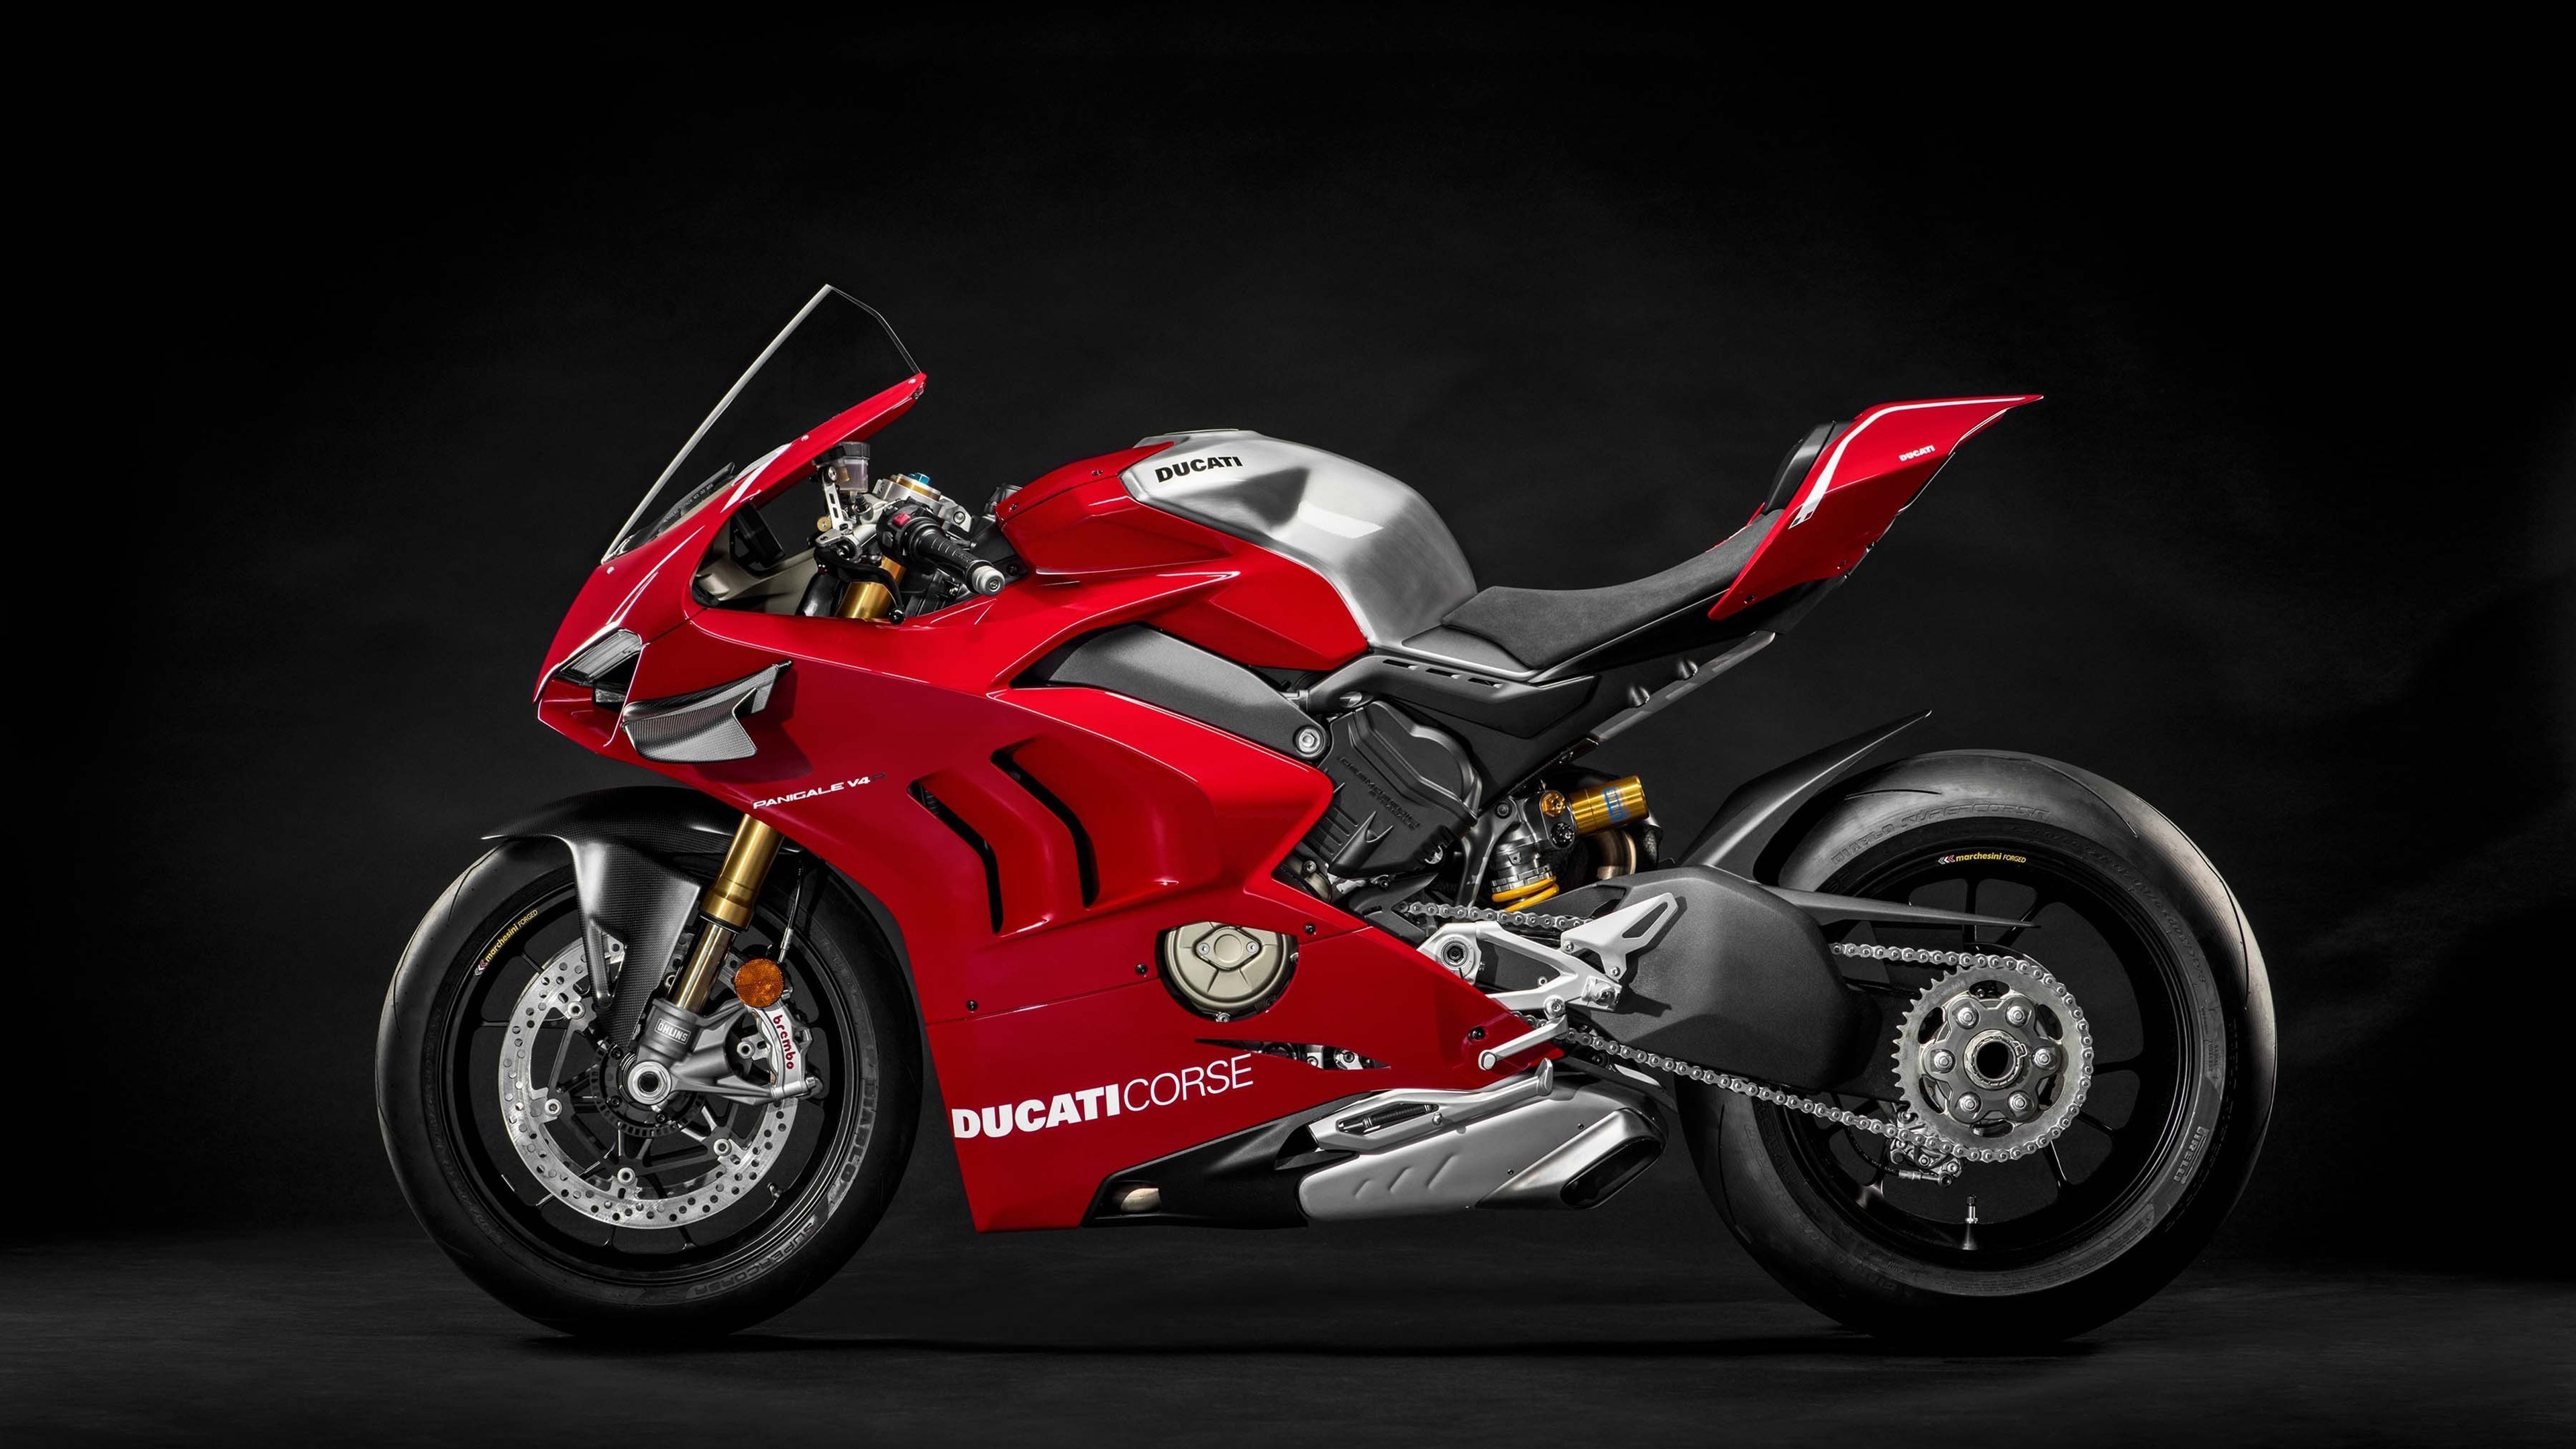 2019 Ducati Panigale V4 R Motorcycle HD Wallpapers